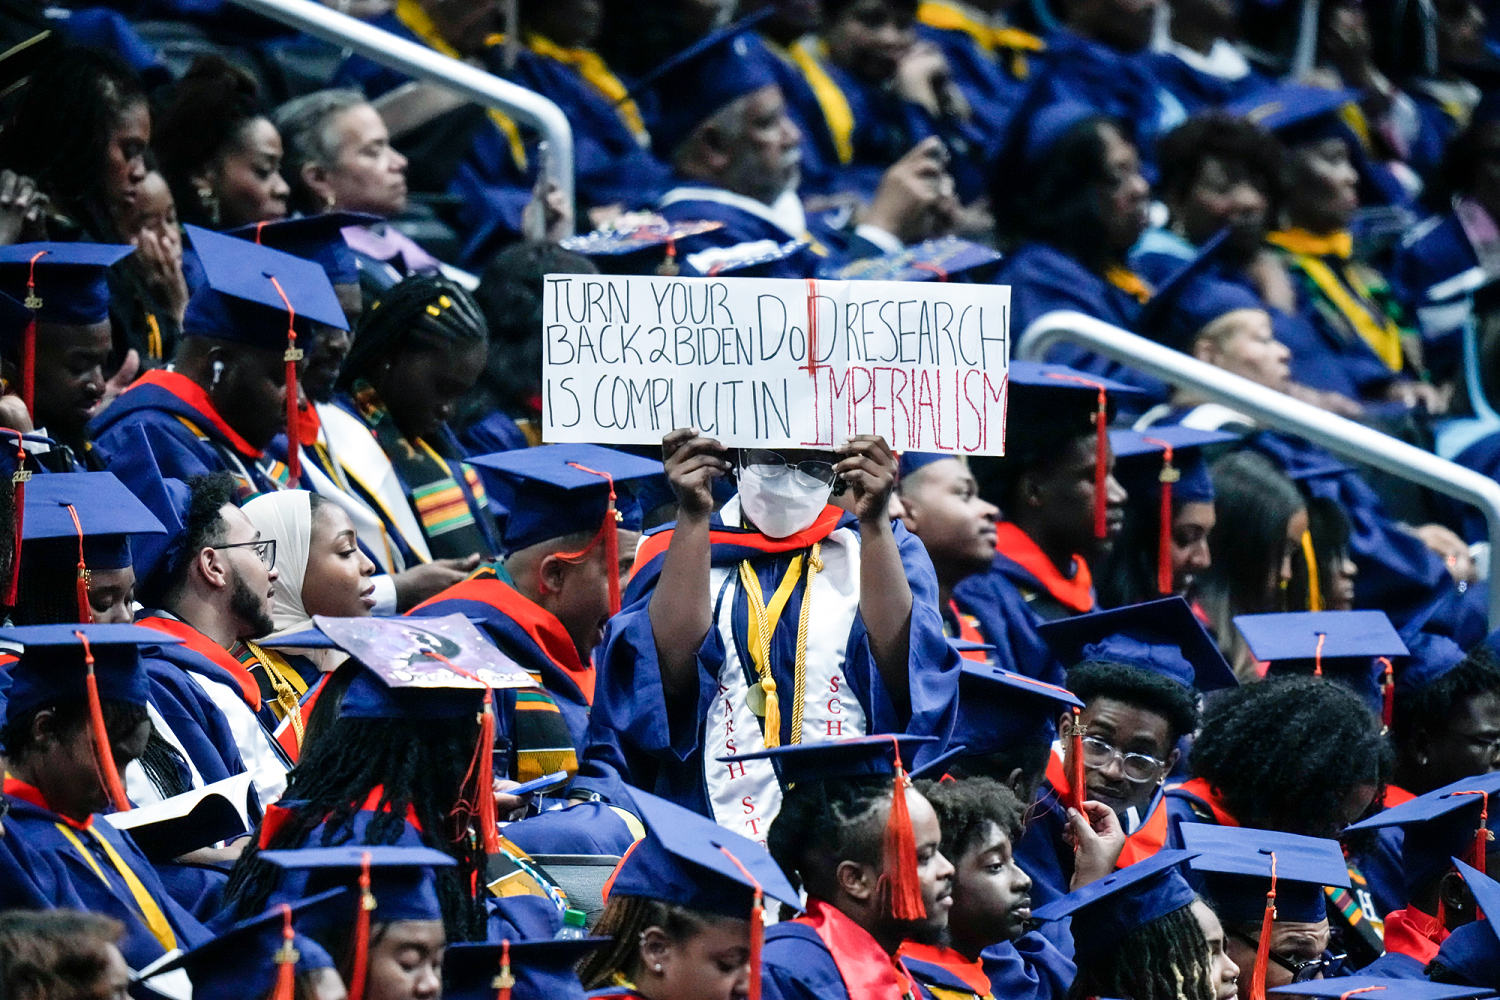 white house plans to limit biden's graduation speeches as campuses erupt in protests